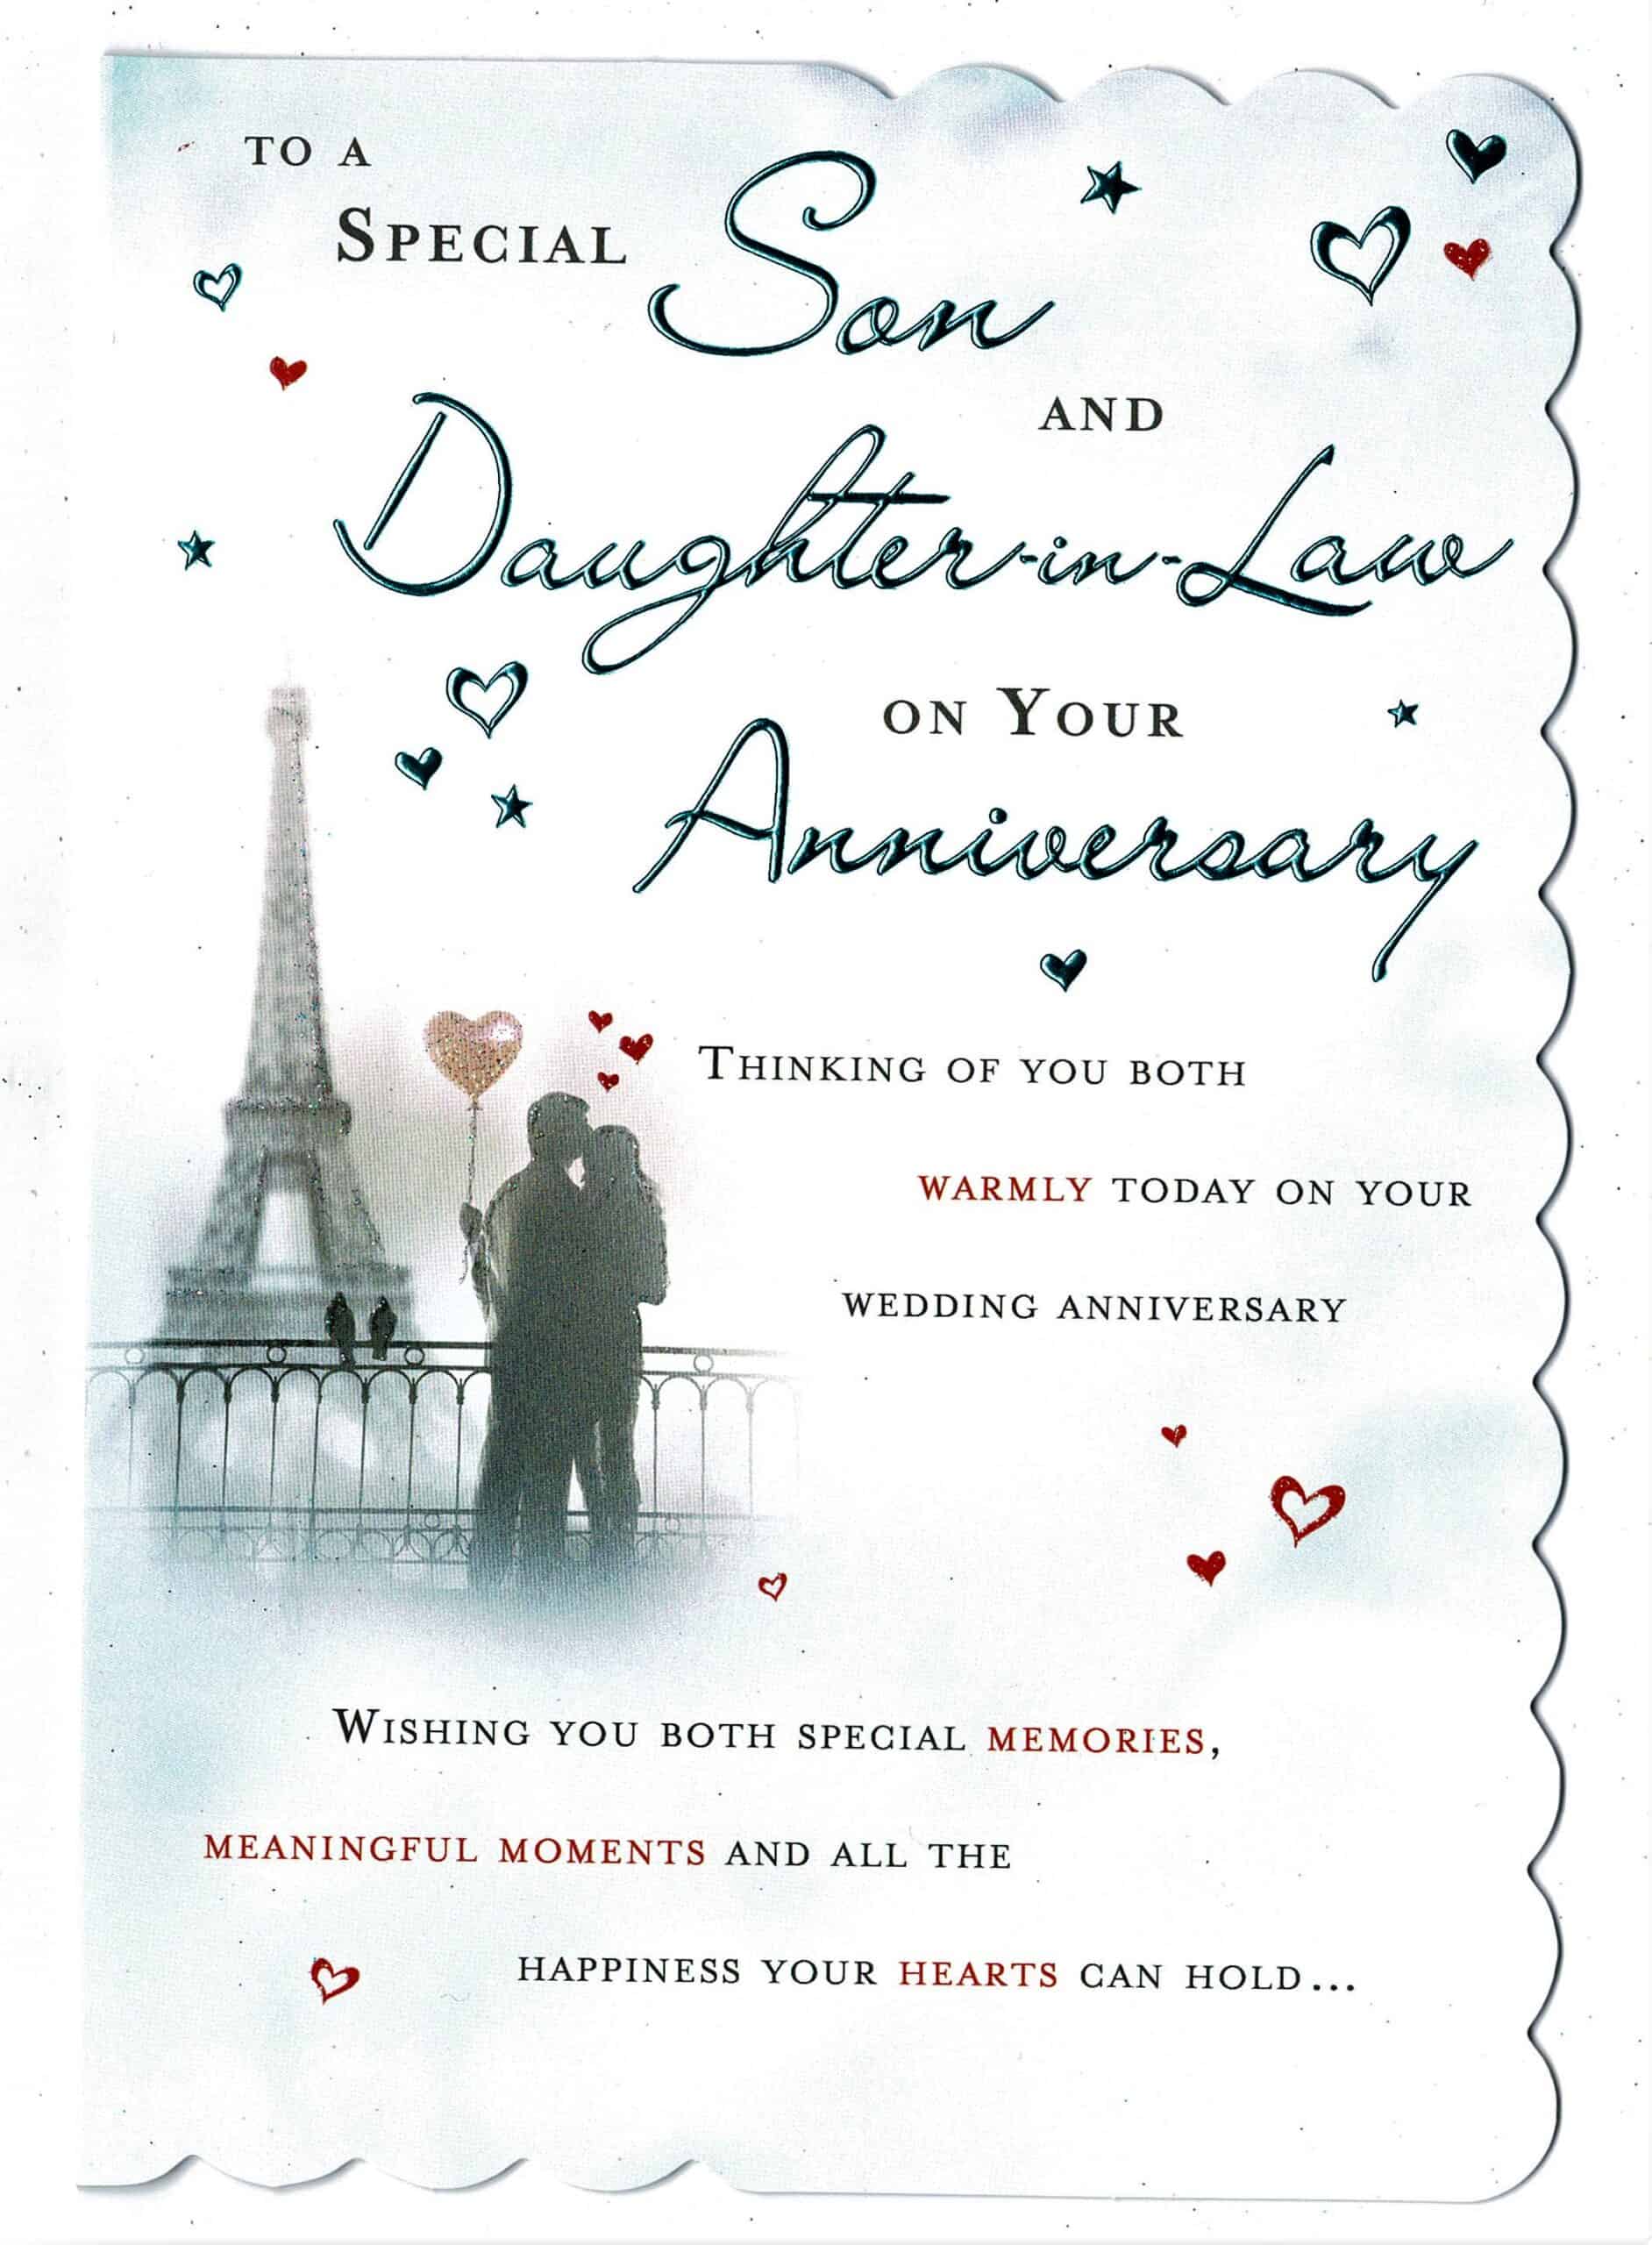 Son And Daughter In Law Anniversary Card With Sentiment Verse With